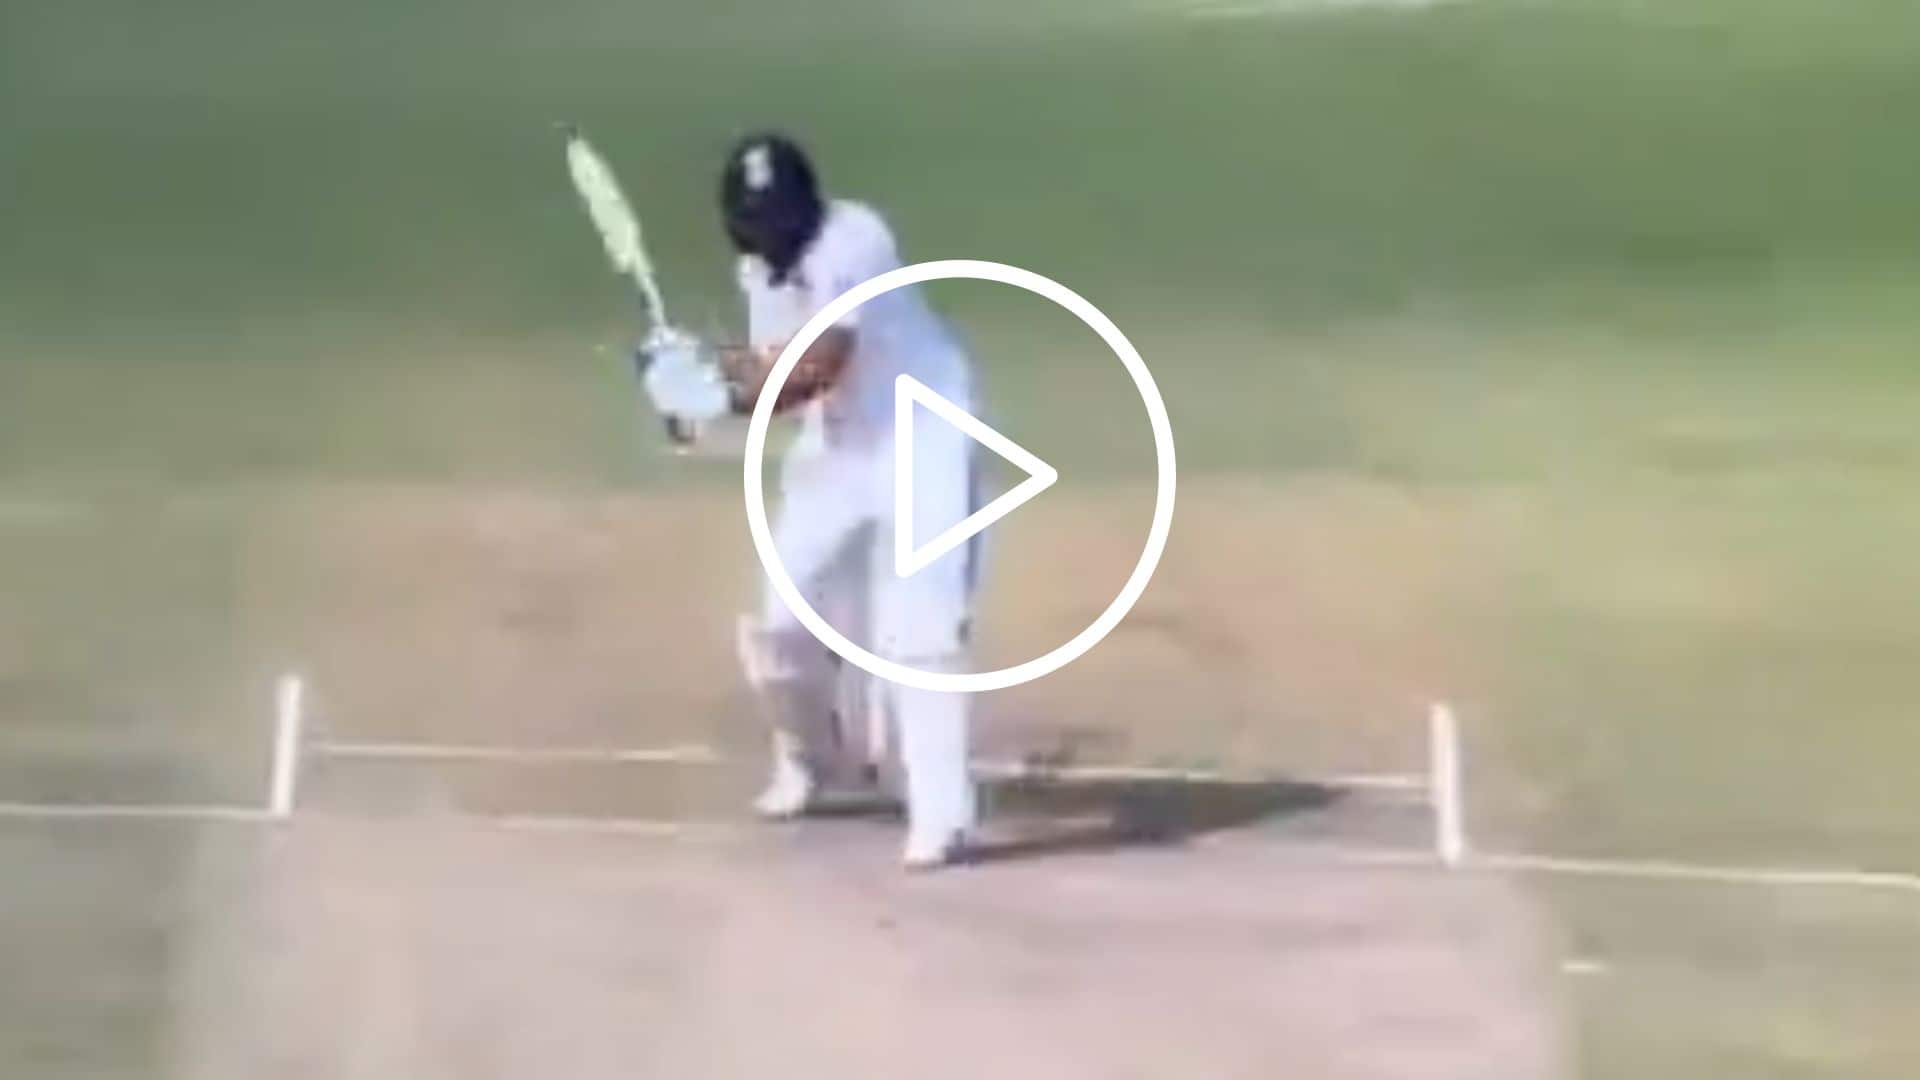 [Watch] Rohit Sharma Fails To Launch His 'Pull Shot' As Mark Wood's Pace Proves Too Hot